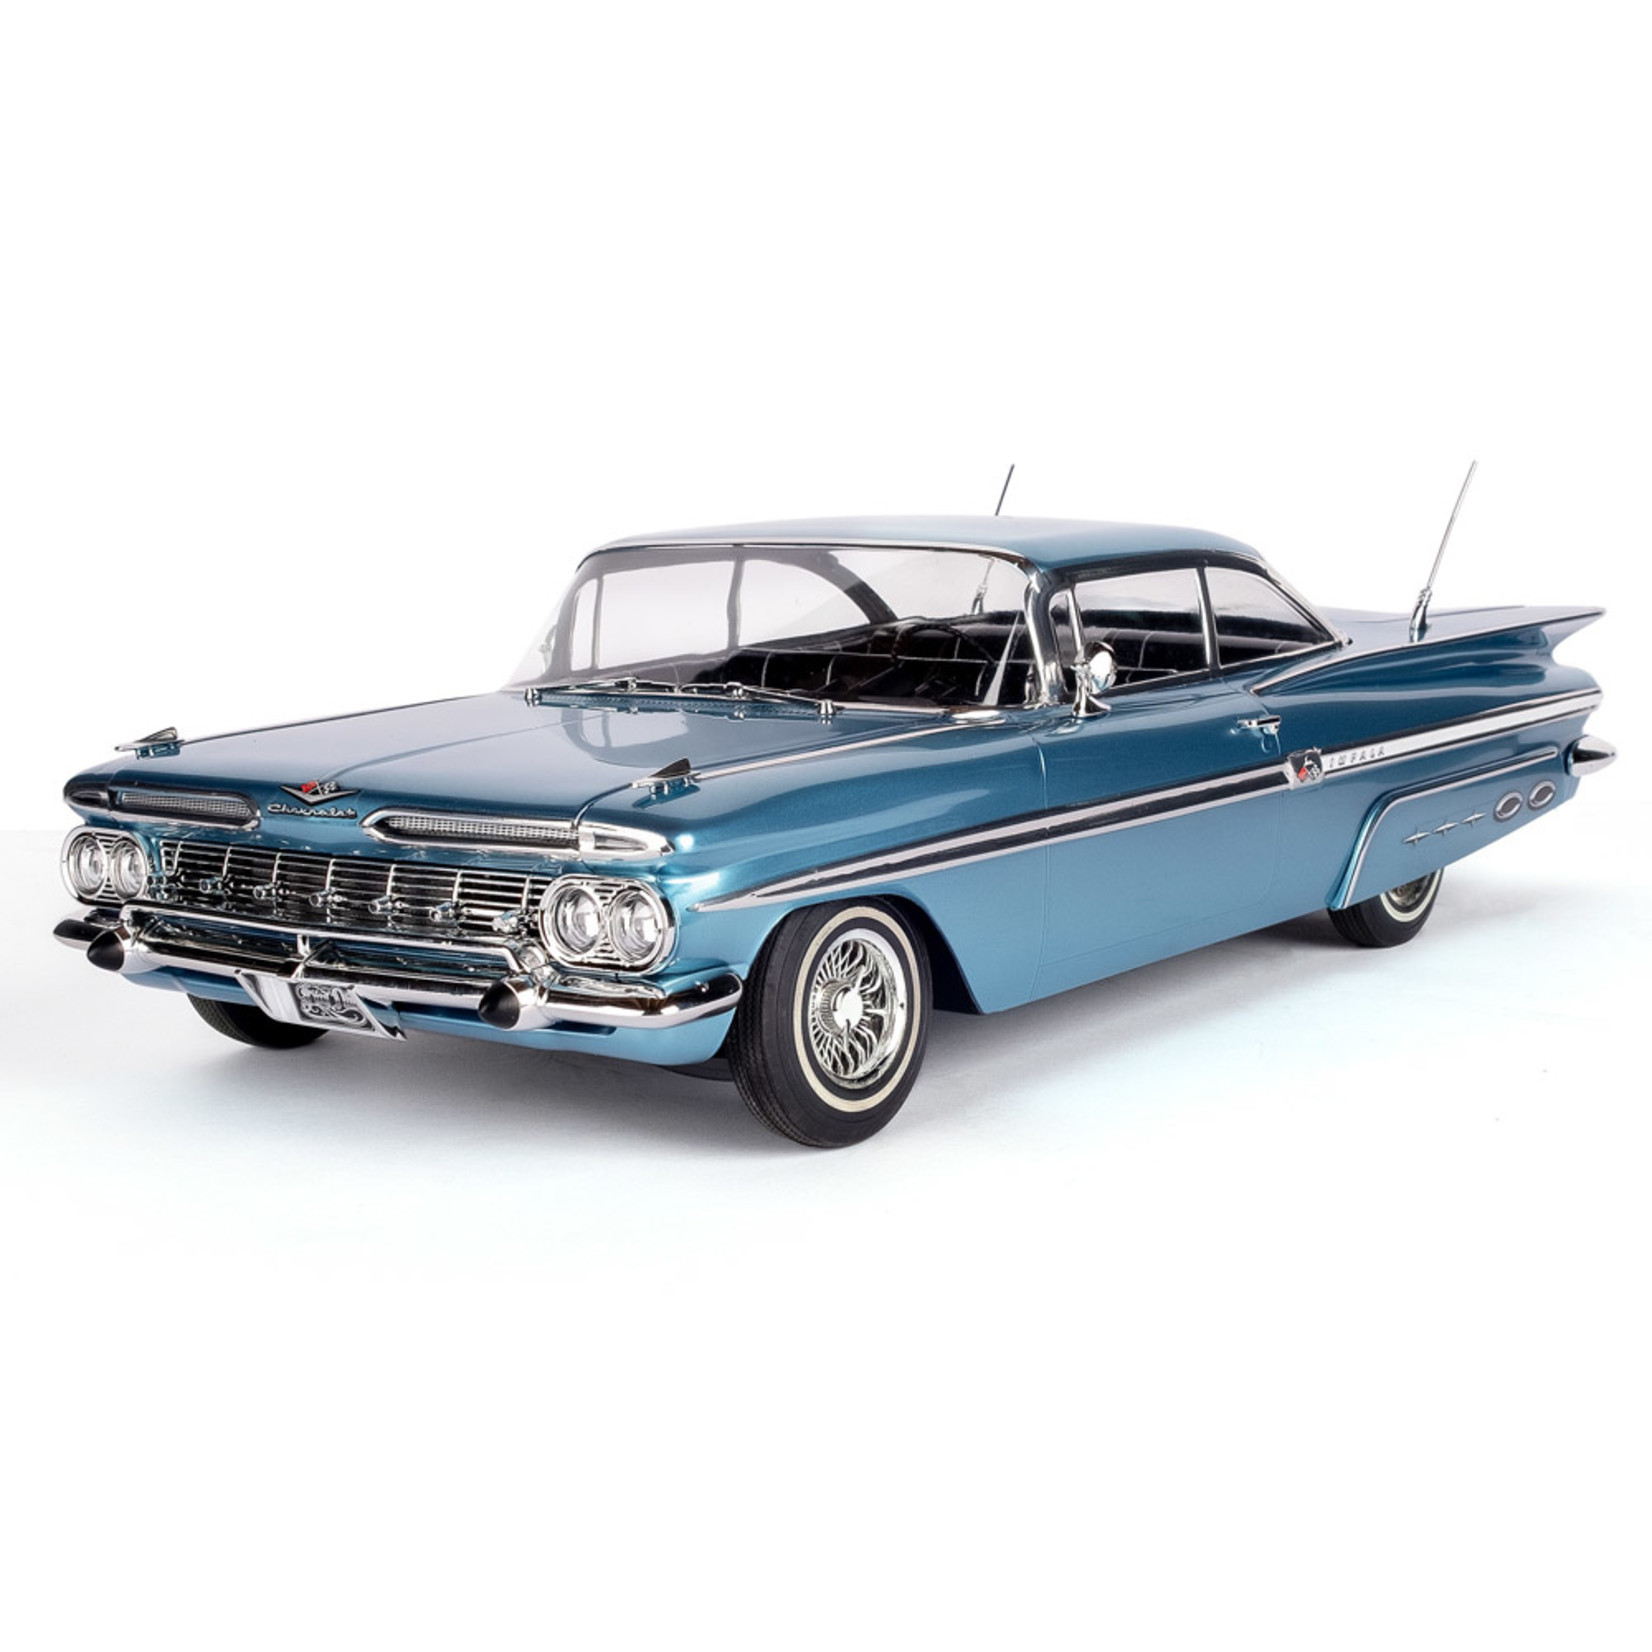 Redcat Racing RER15390  REDCAT FIFTYNINE RC CAR - 1:10 1959 CHEVROLET IMPALA HOPPING LOWRIDER